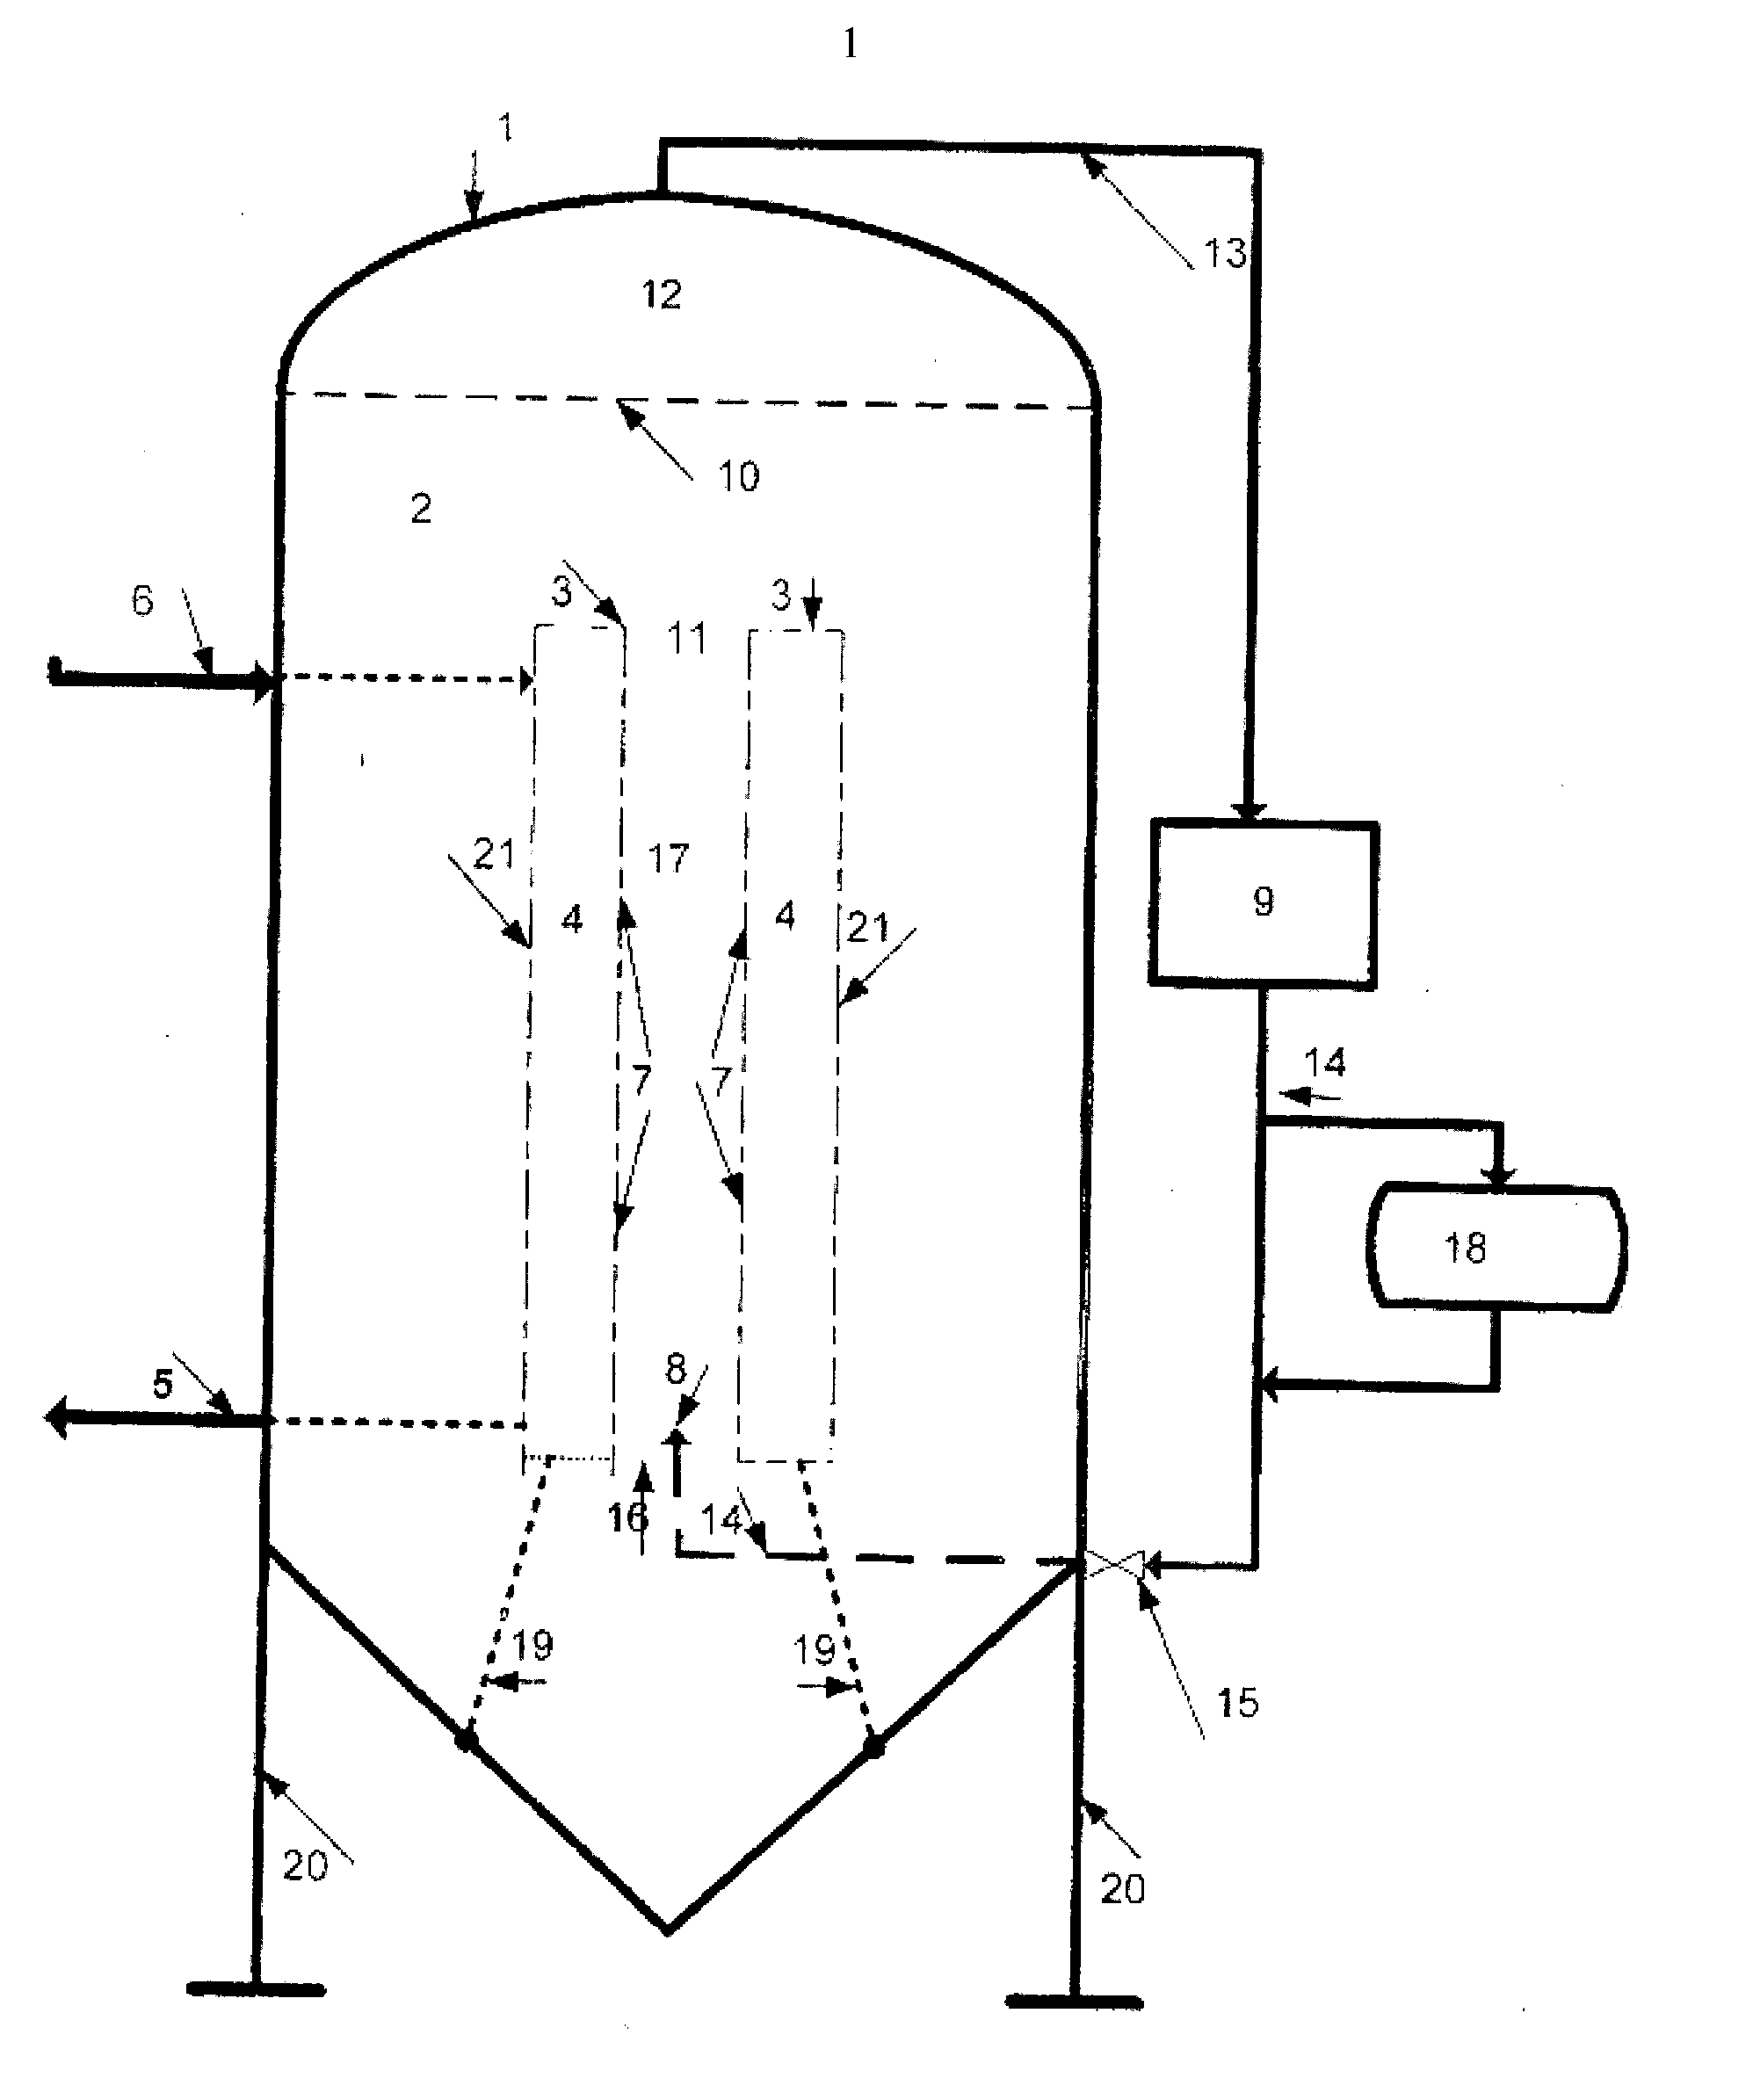 Reduction of the cooling time of the beer in processing tanks by injecting carbon dioxide gas